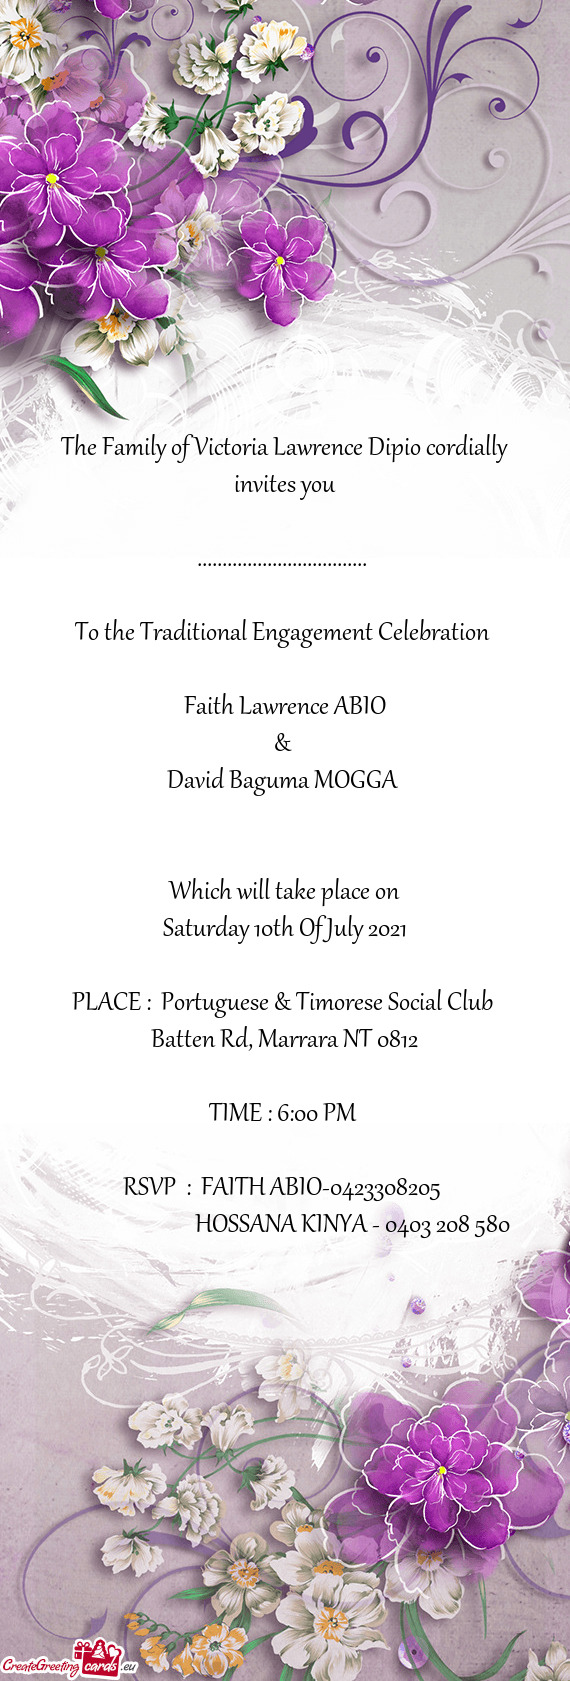 To the Traditional Engagement Celebration